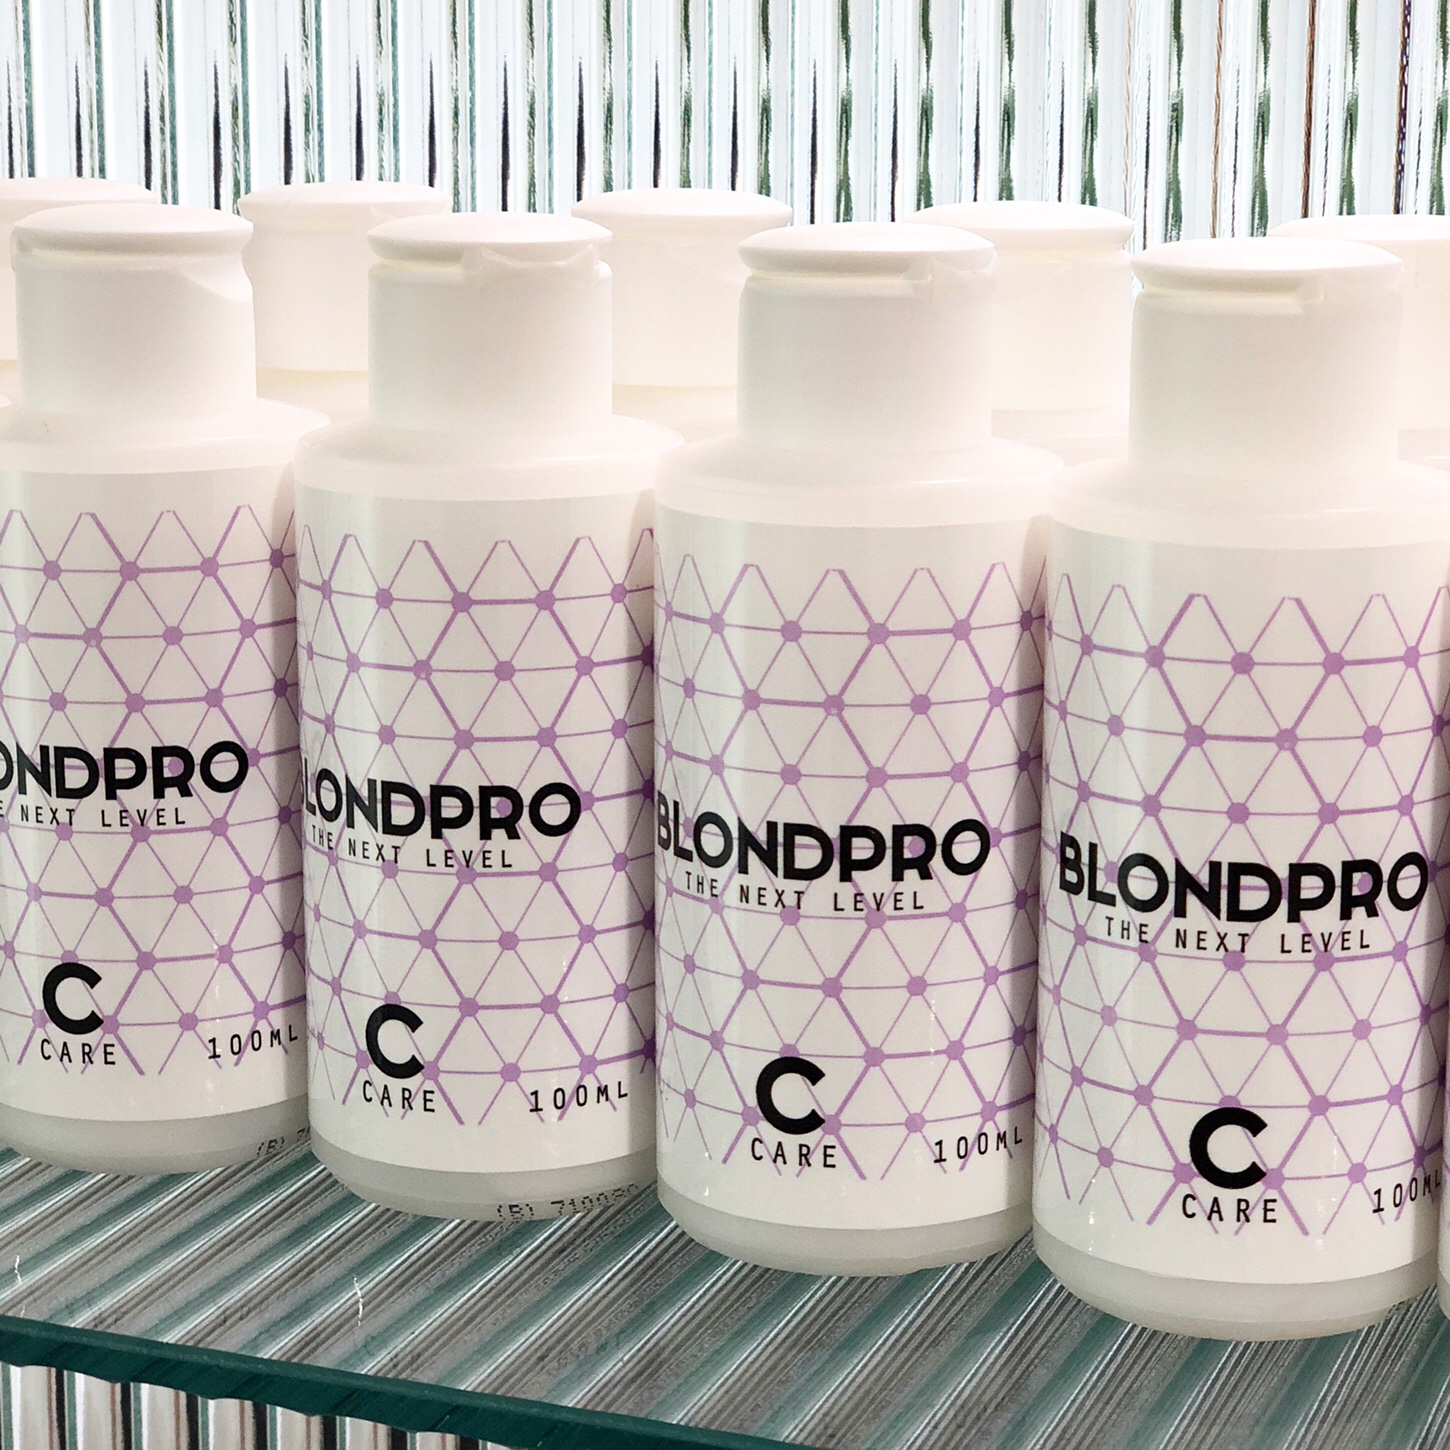 Blondpro products 